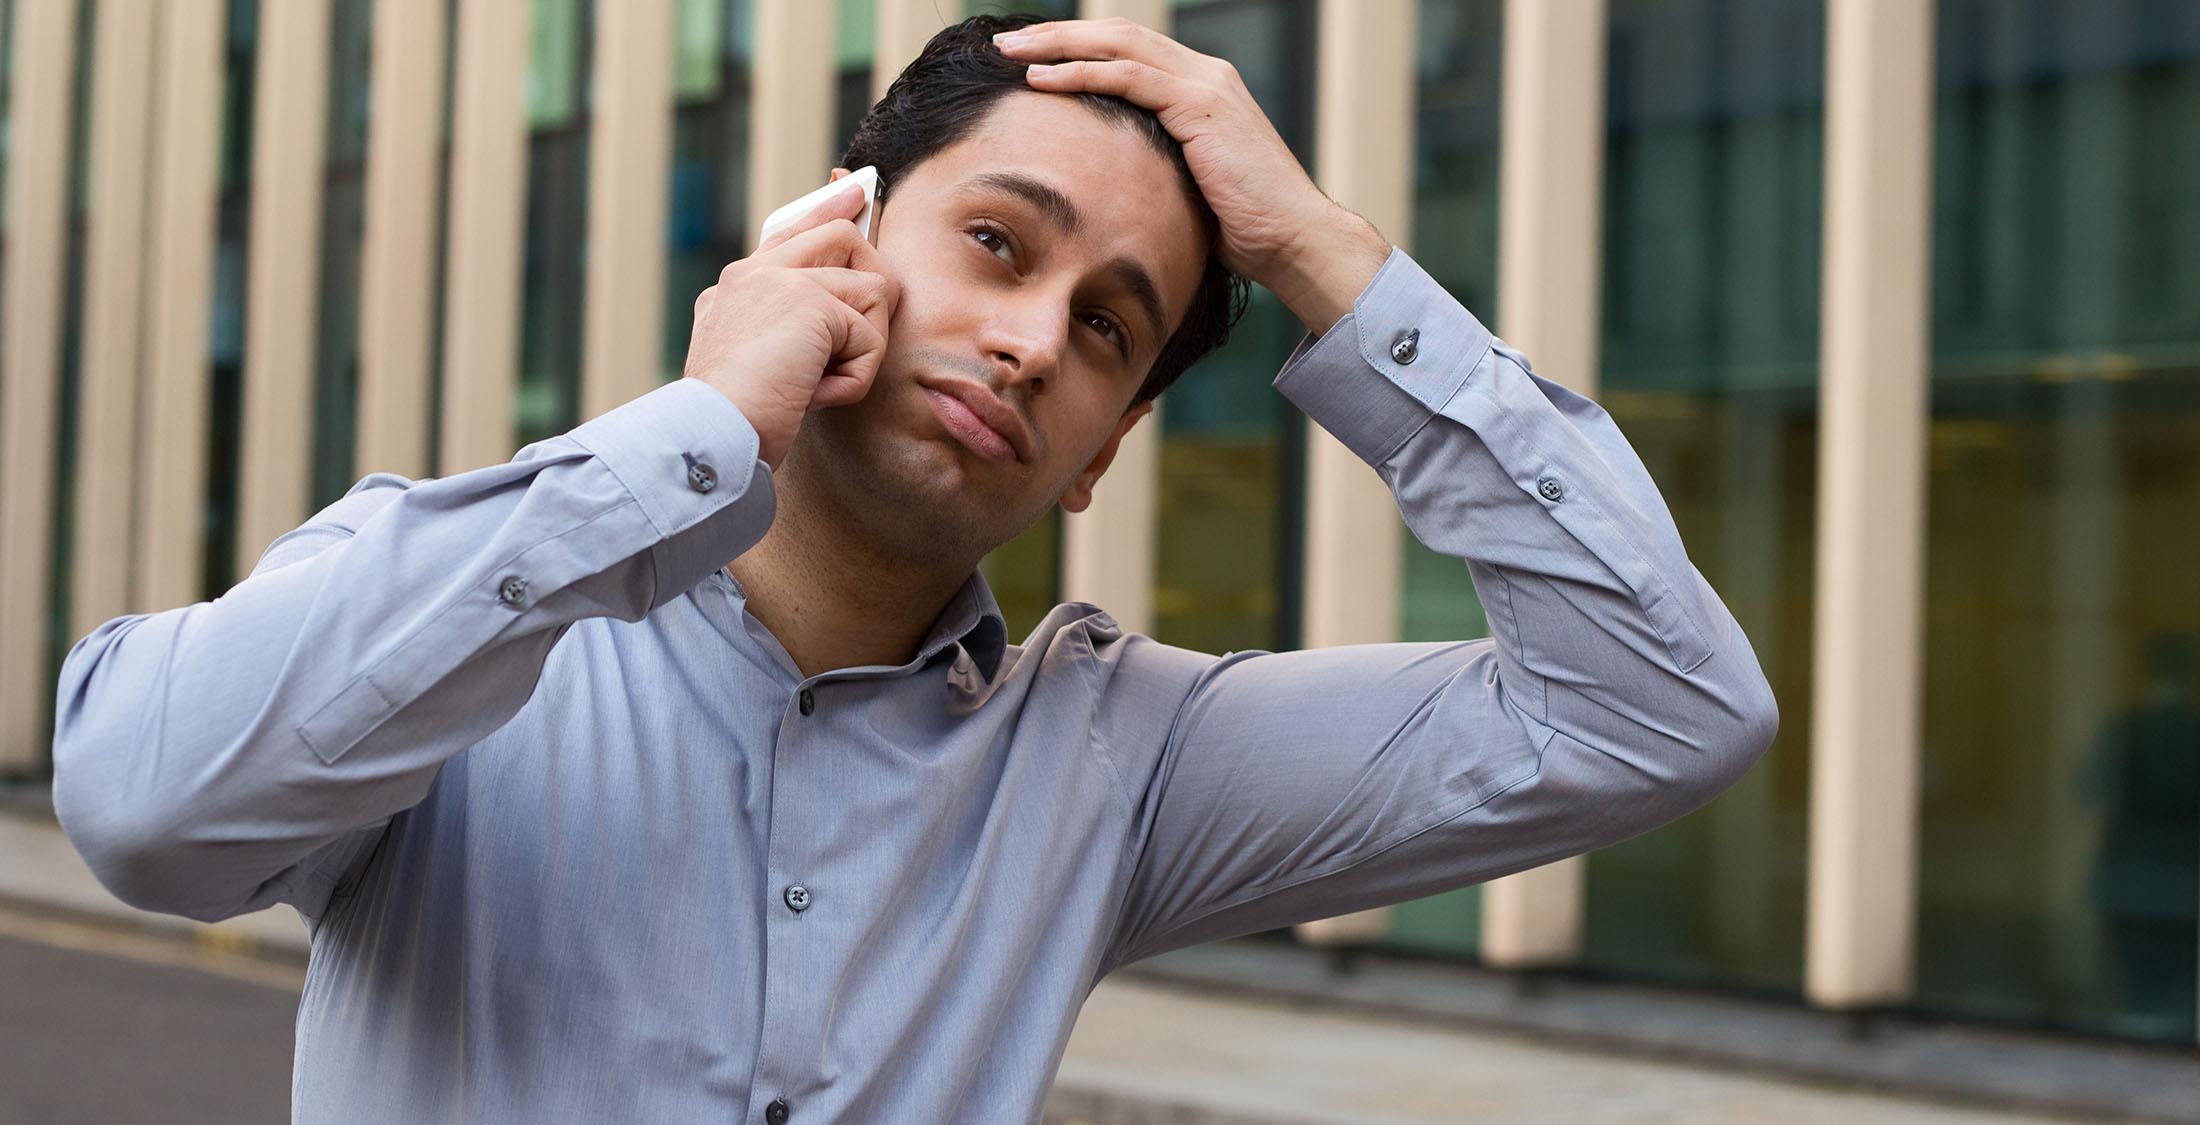 man frustrated on phone call